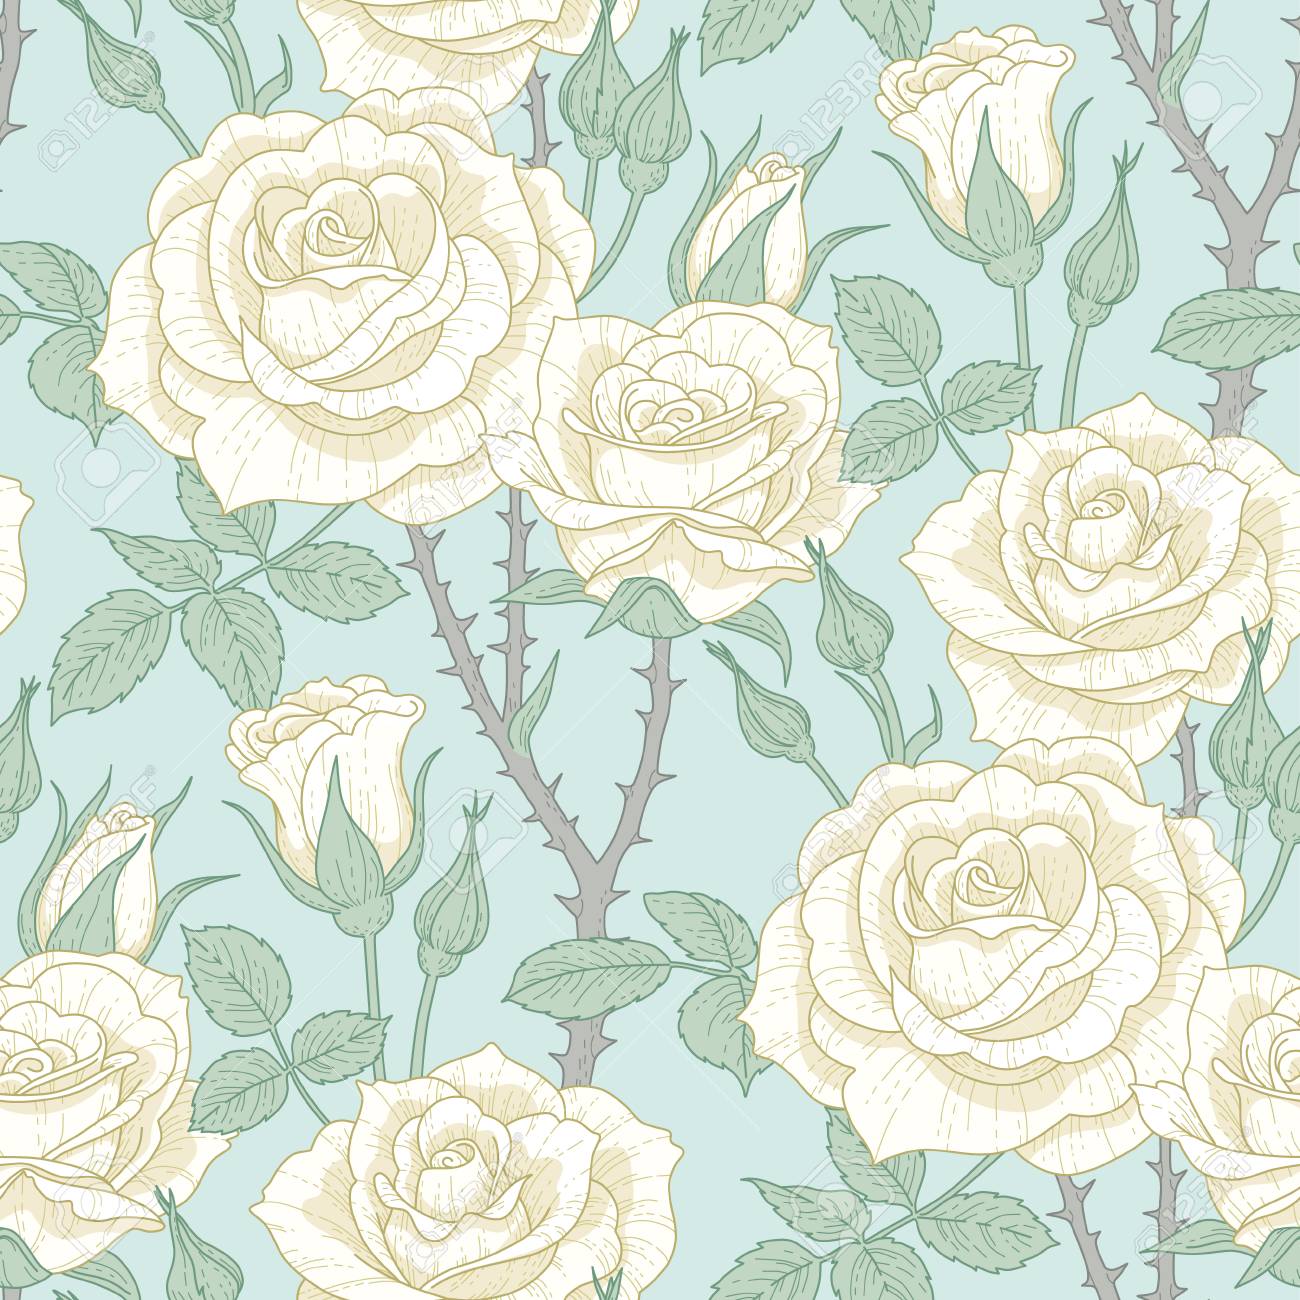 Floral Seamless Pattern Of White Roses On Light Blue Background